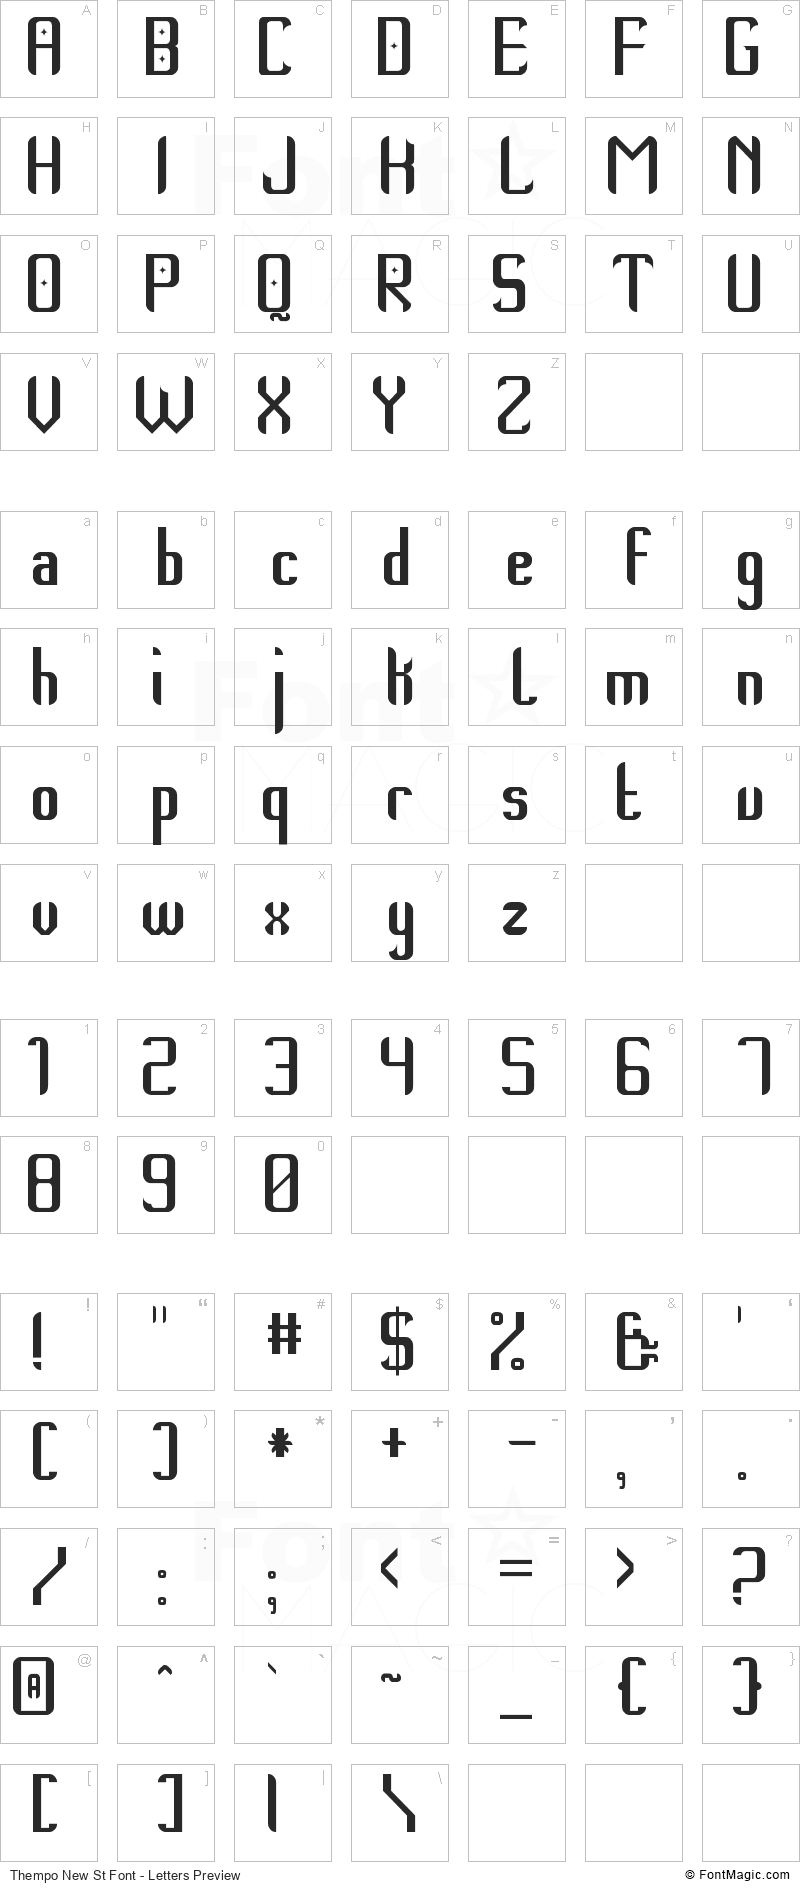 Thempo New St Font - All Latters Preview Chart